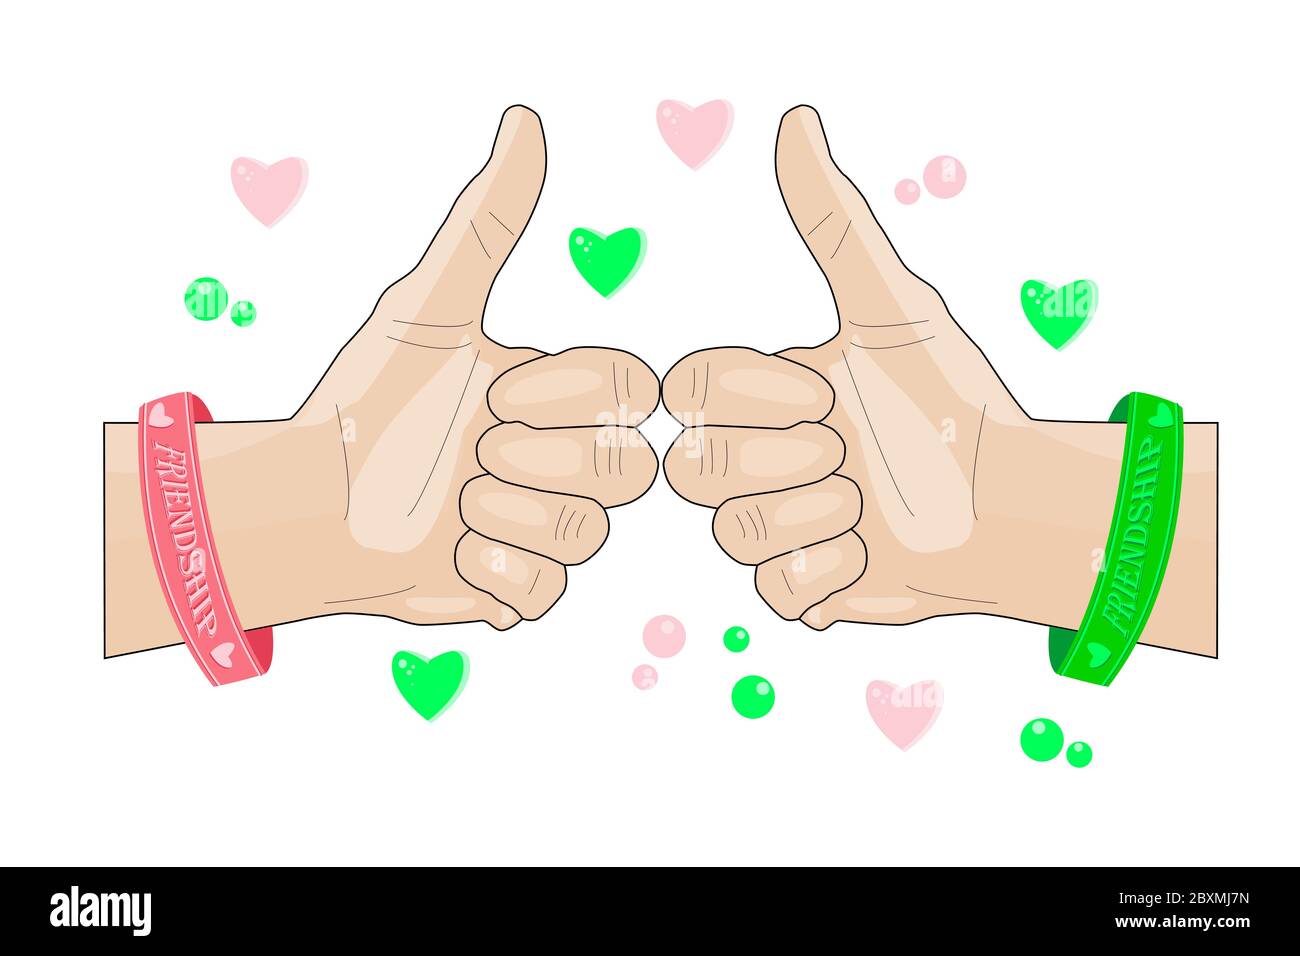 Friendship gesture isolated on white background. Happy friendship day. Hands with rubber bracelets. Celebrating friendship day concept. Stock vector Stock Vector